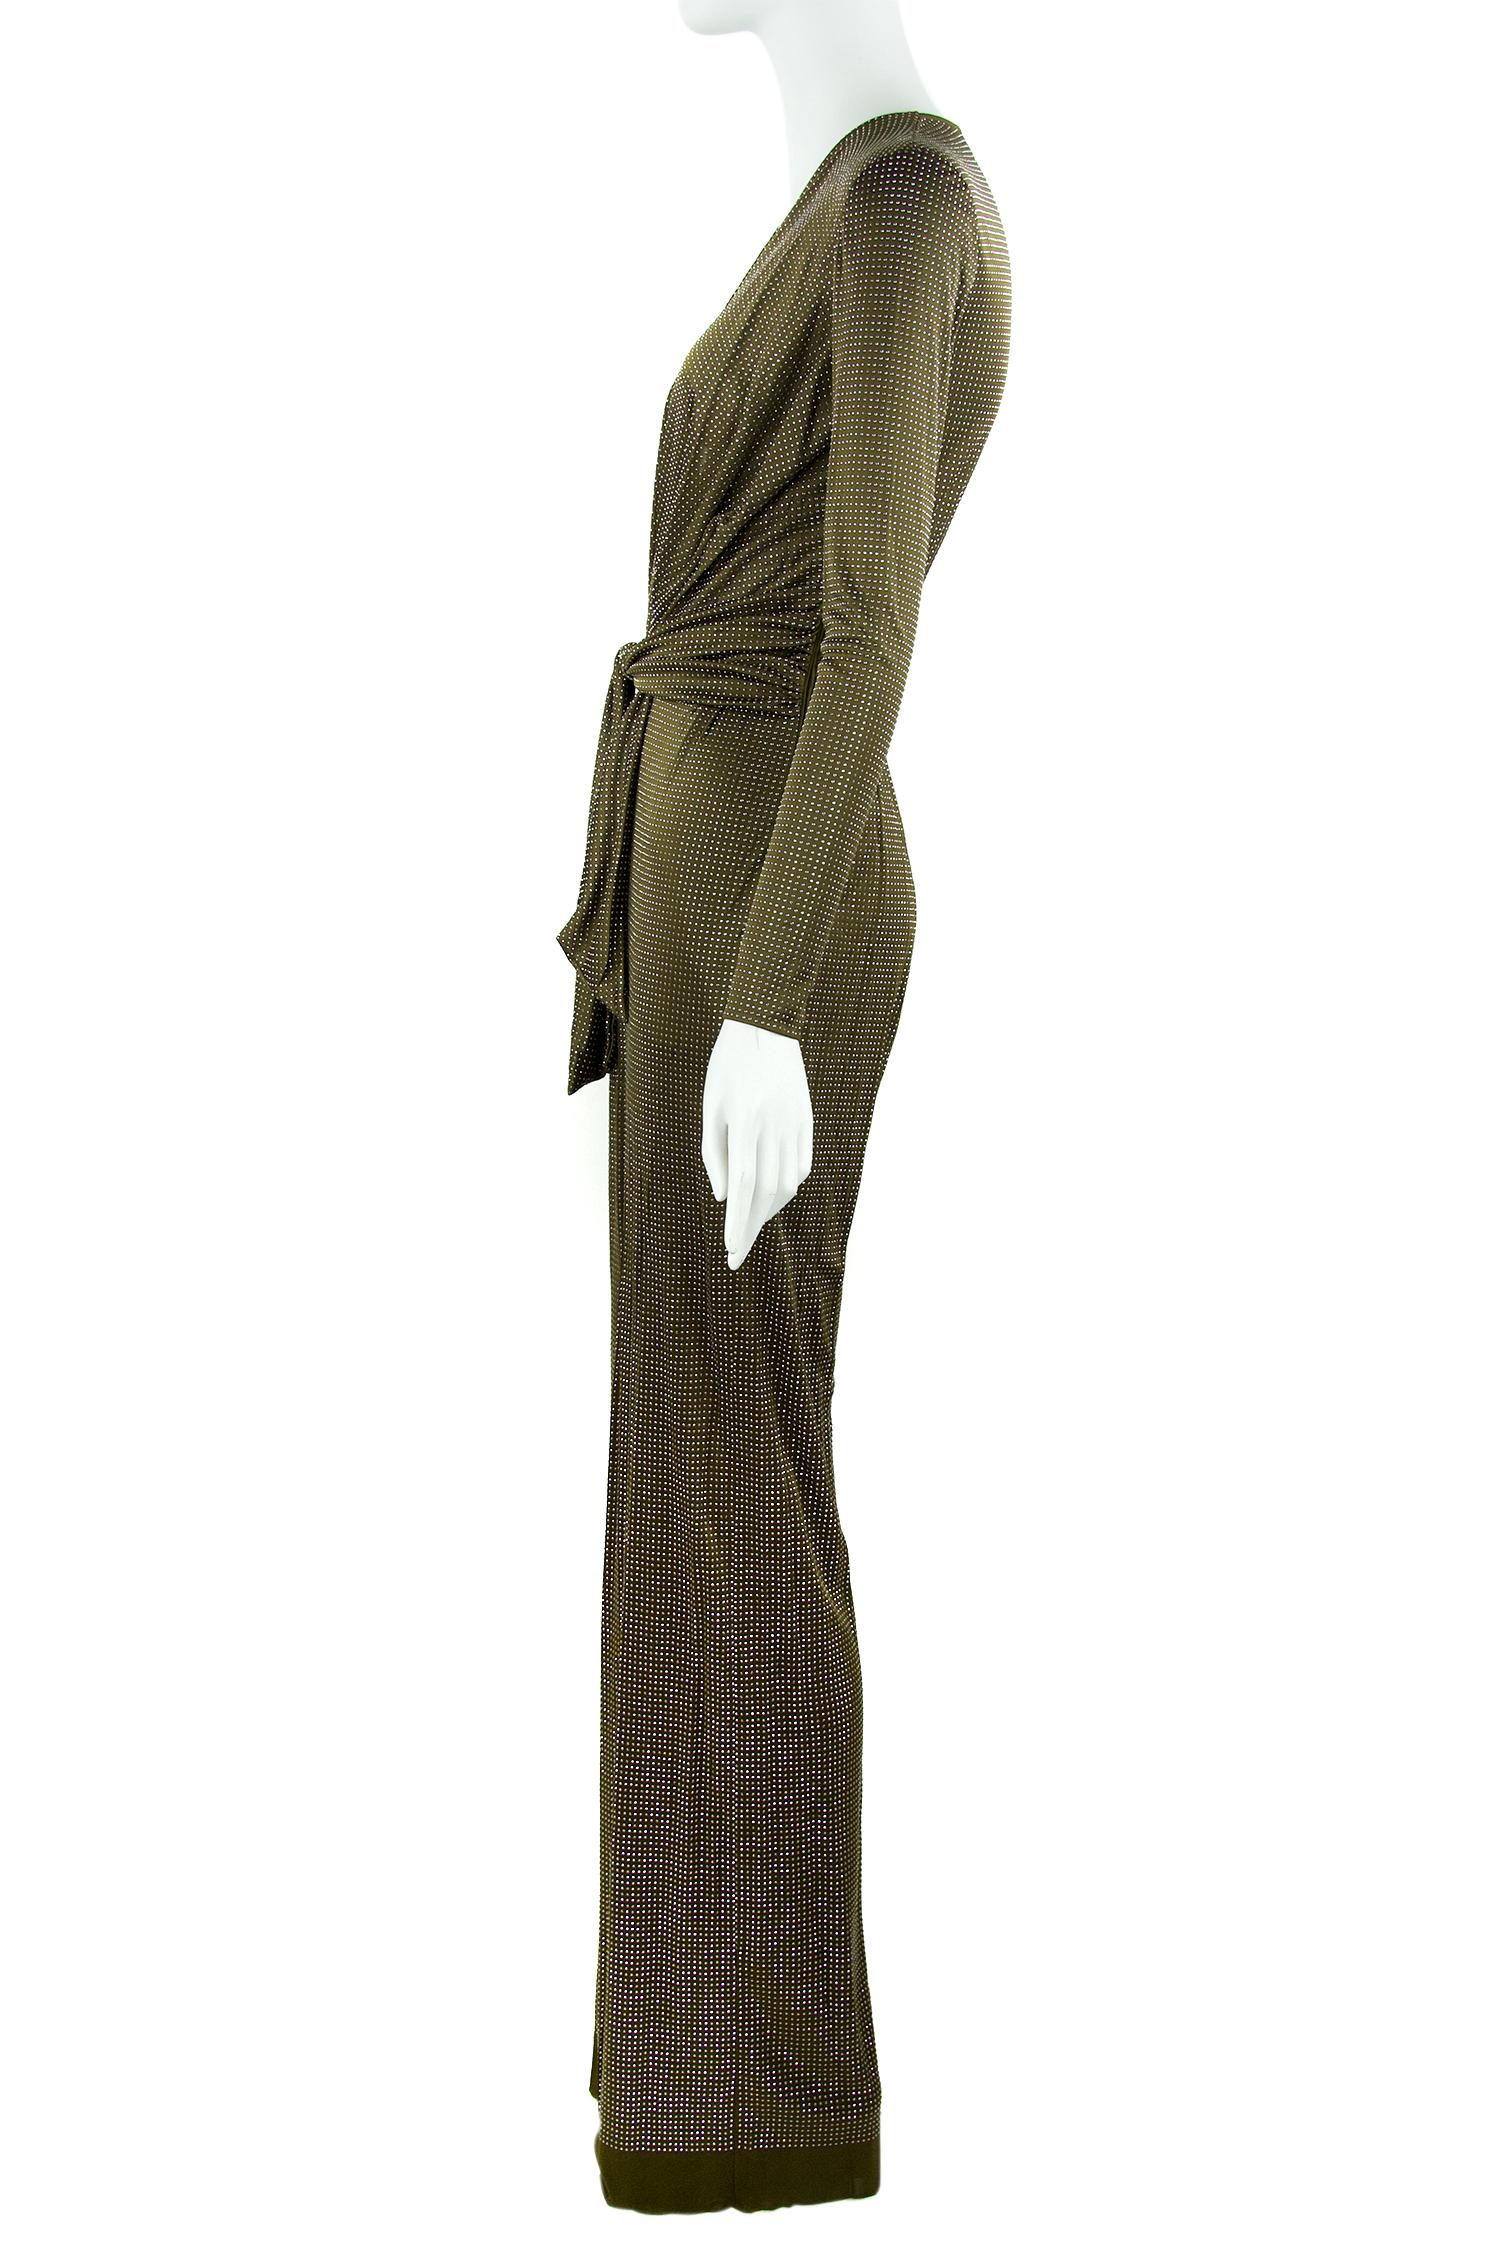 Incredible Emilio Pucci stretch knit jumpsuit that brings back a taste of the 70s.  Features a plunging v neck with a gathered waist and silver beaded brown fabric. Additionally, there are delicate covered buttons on the sleeves. Such a fun look for